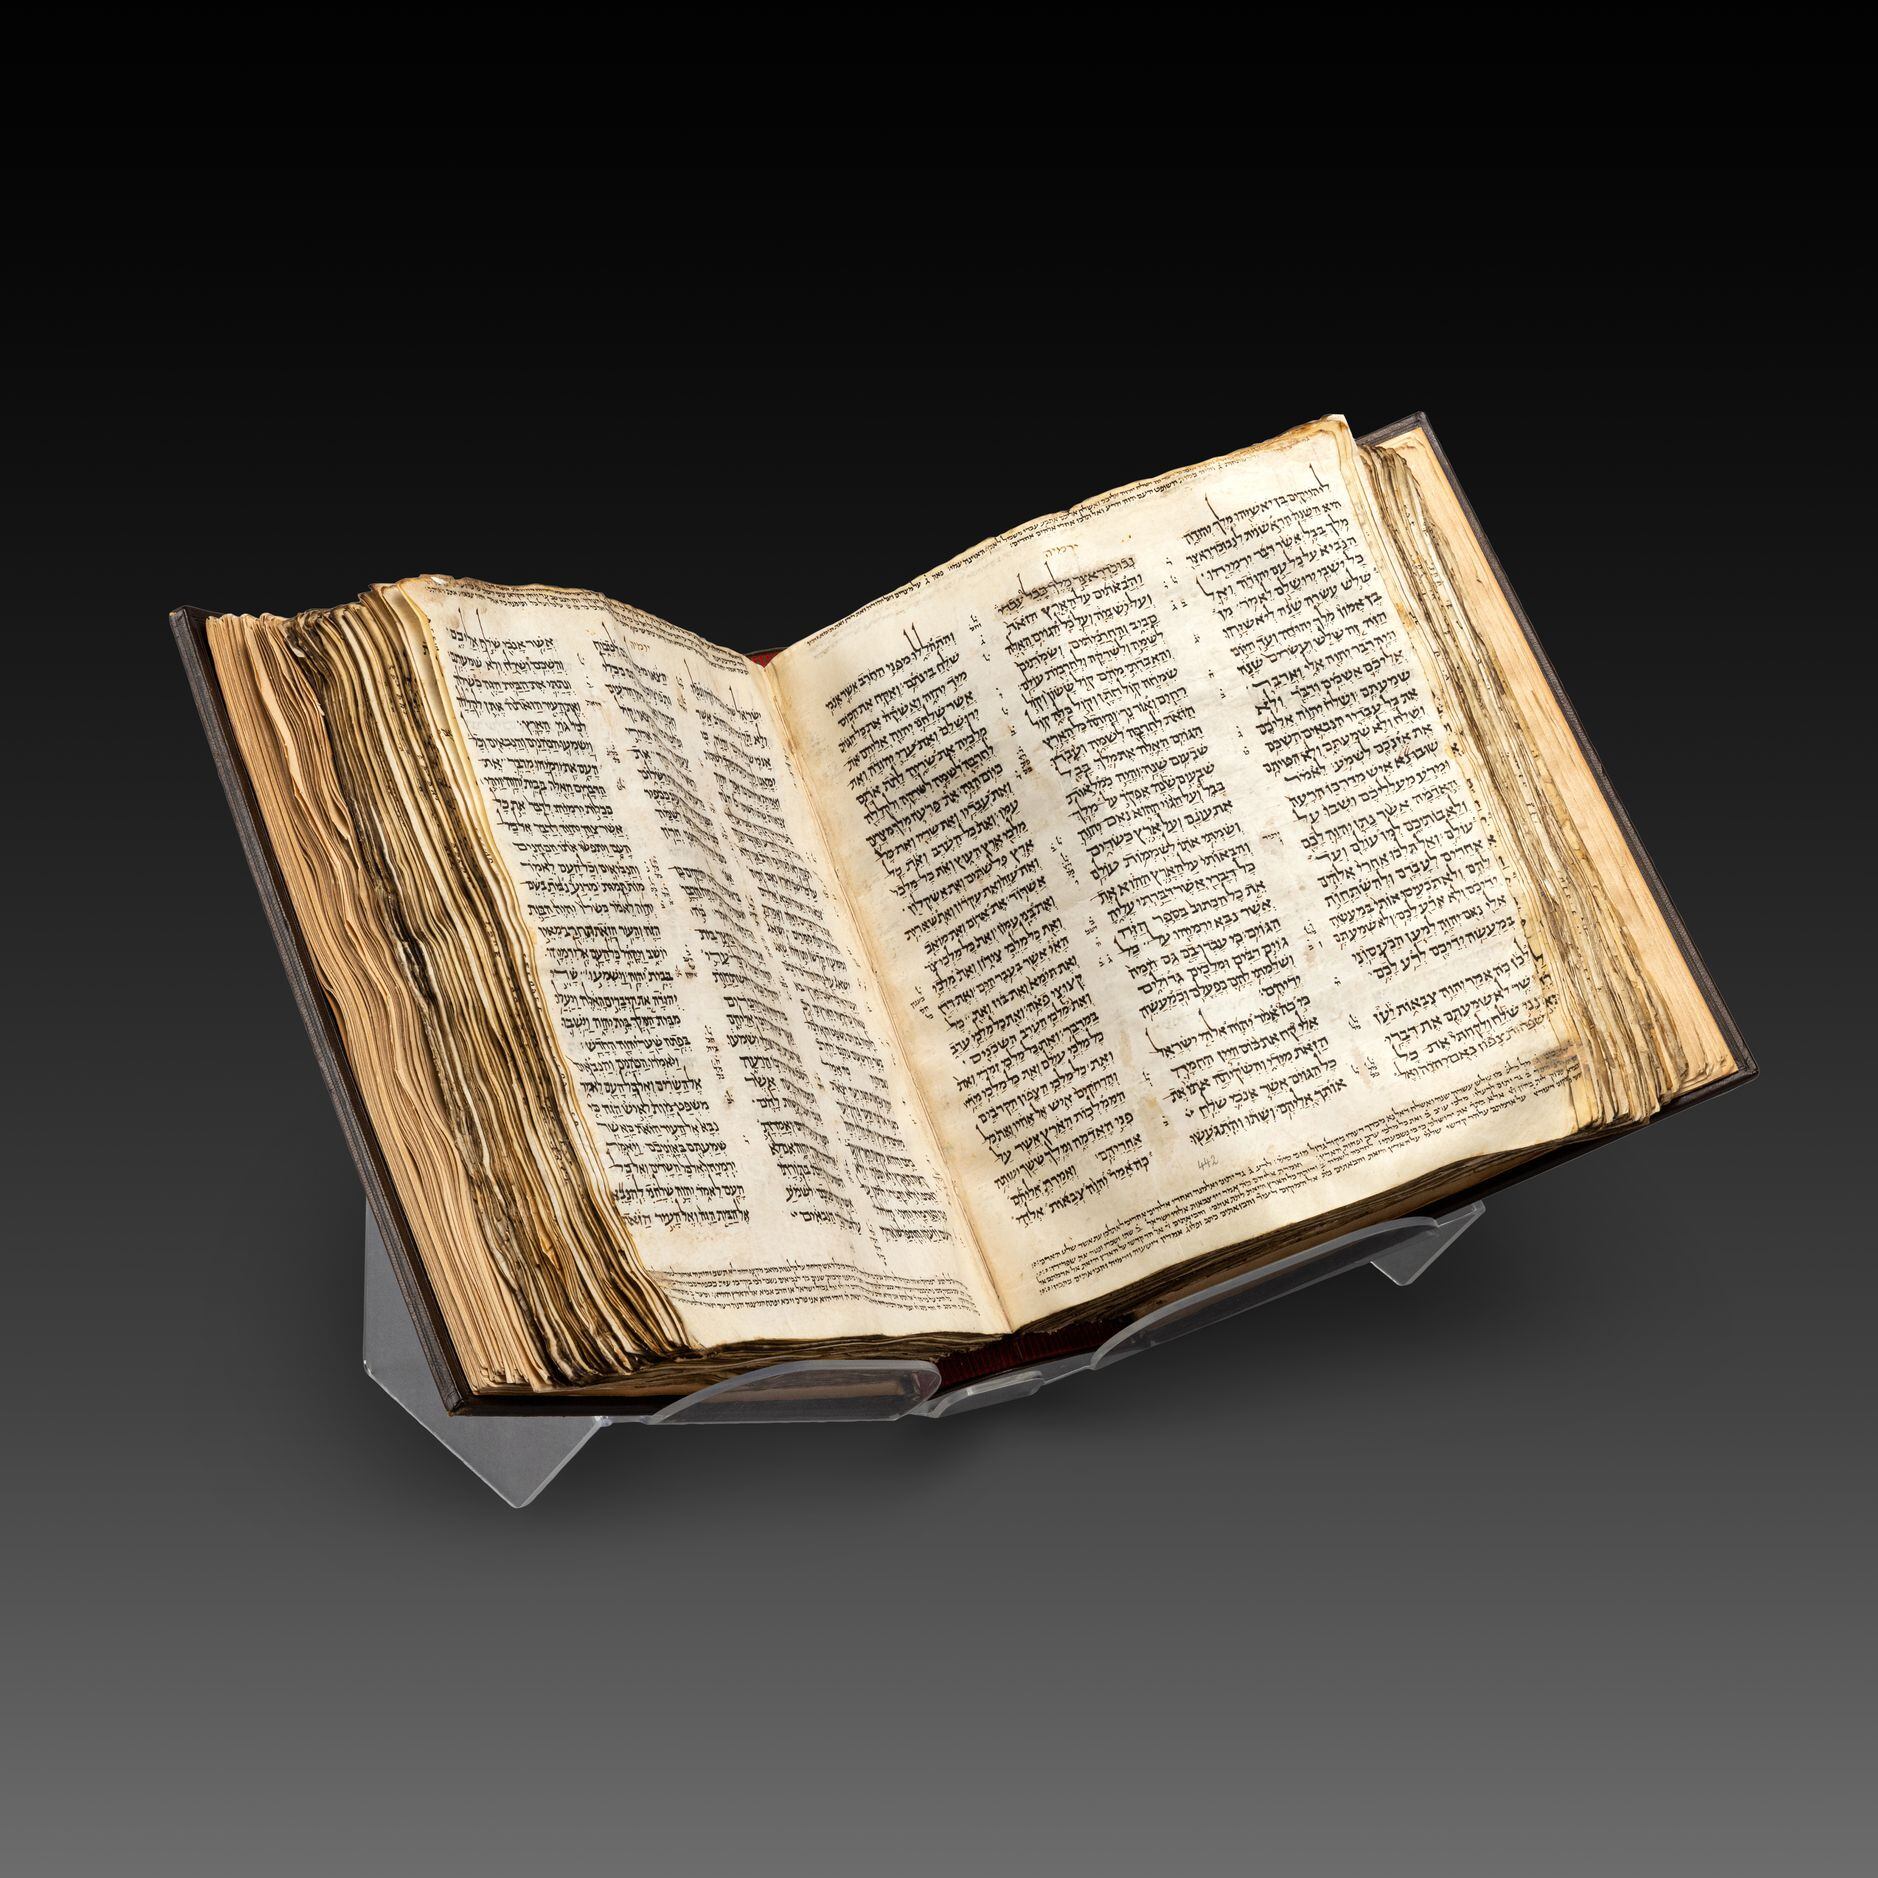 A Hebrew Bible that's over four times older than the U.S. is coming to  Dallas